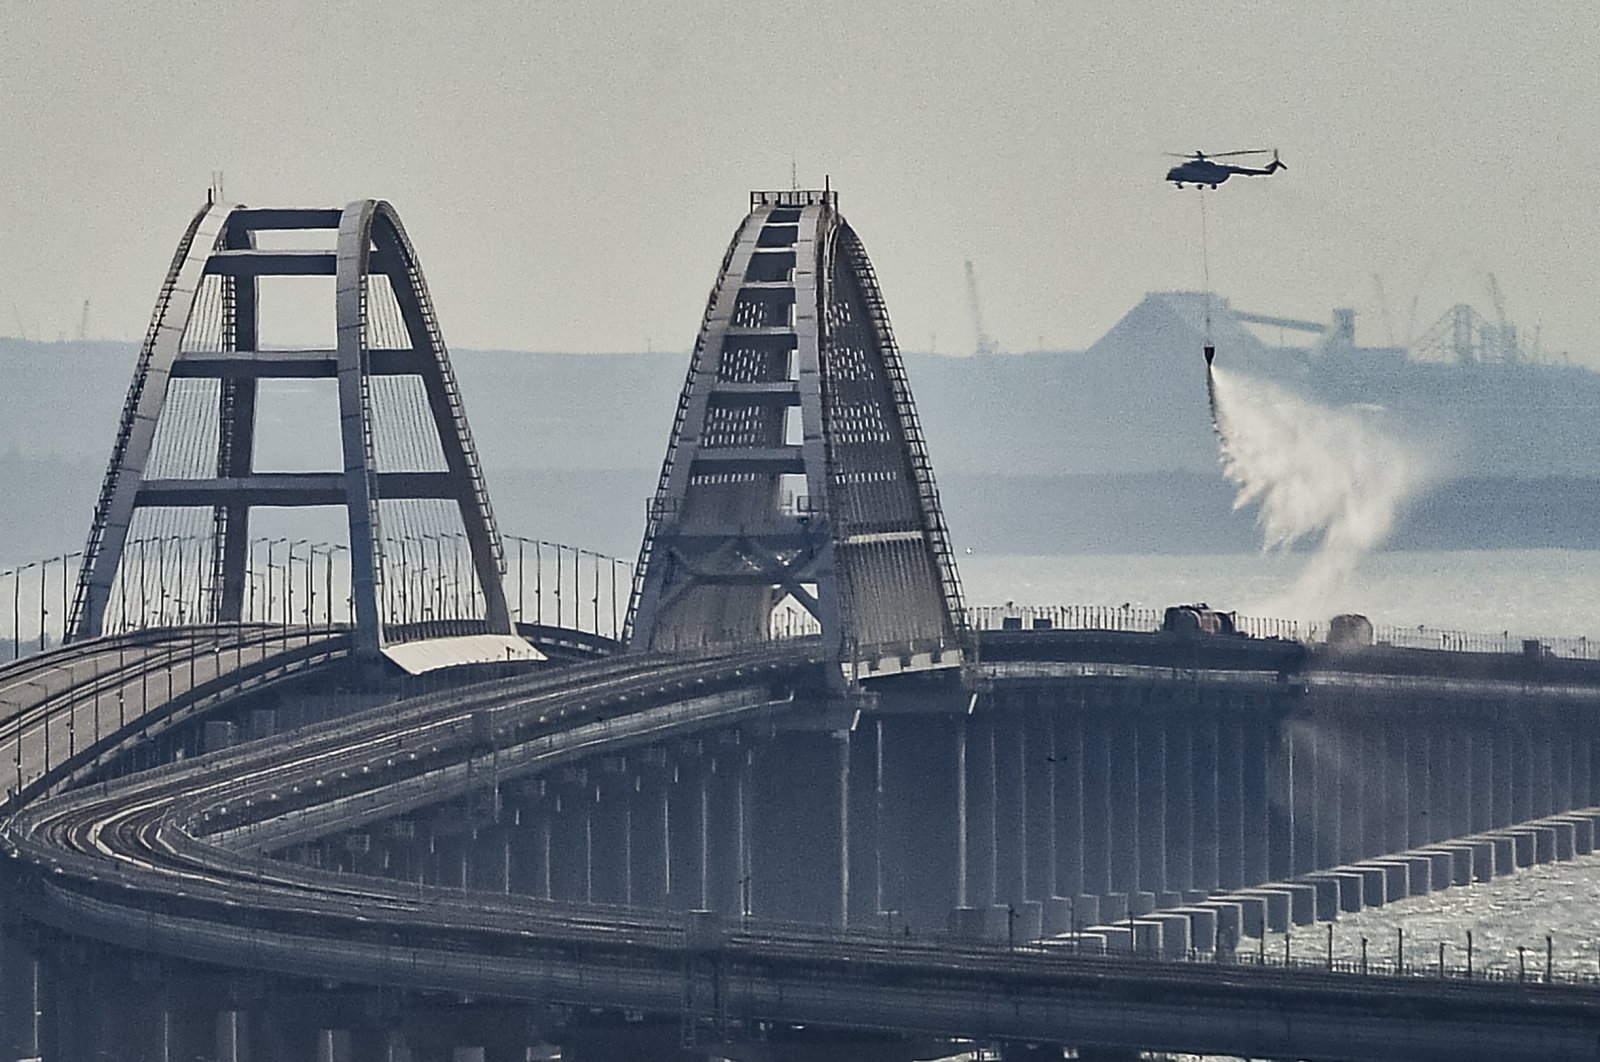 A firefighter helicopter pours water on the fire on a collapsed part of the Kerch Strait bridge in Crimea, Oct. 8, 2022. (EPA Photo)